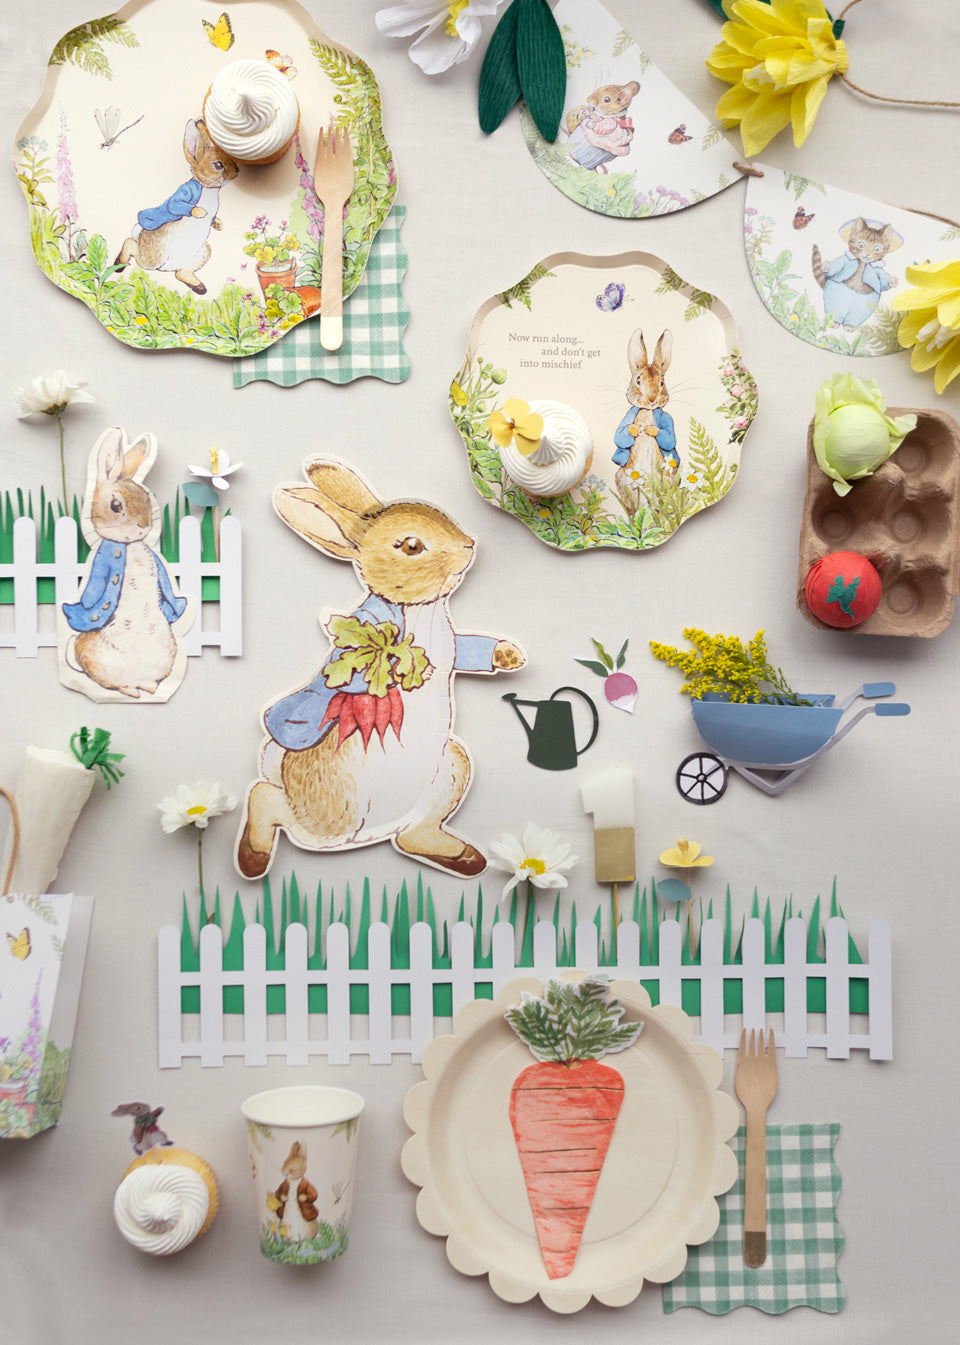 Peter Rabbit decorations are placed across a table, including Peter Rabbit plates, garlands, cups, party bags, and napkins.